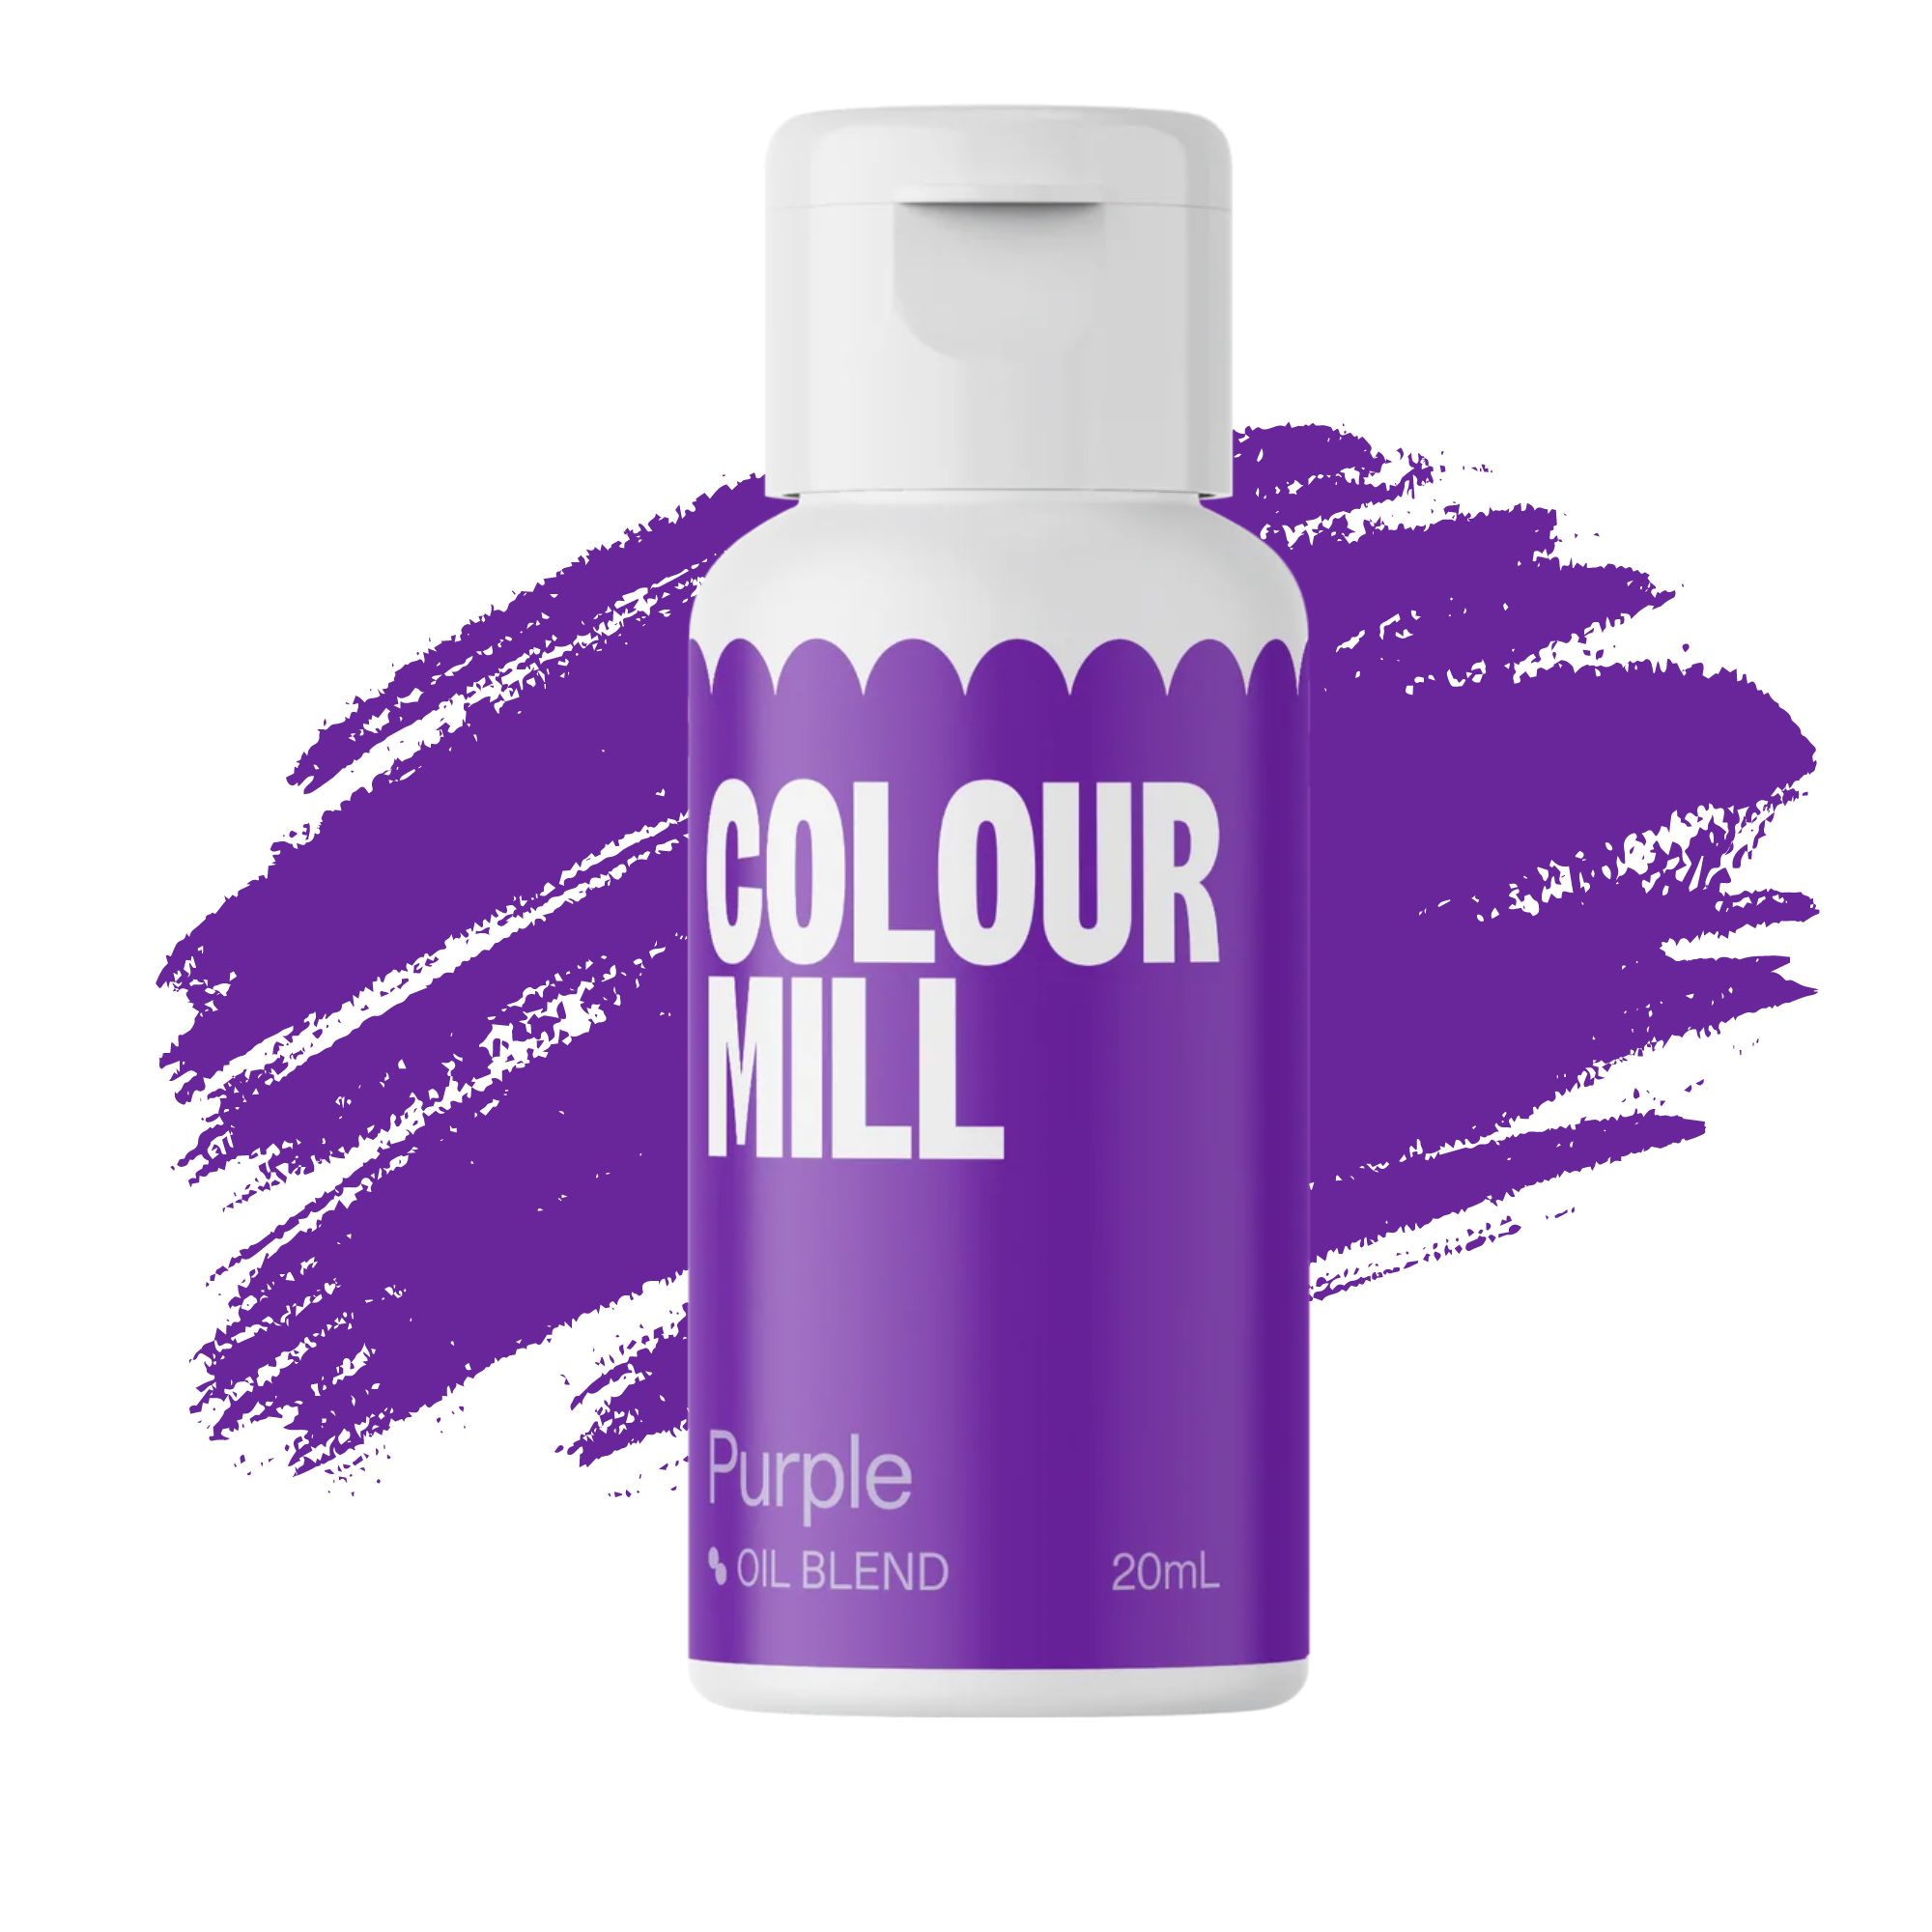 Colour Mill Purple Food Colouring, Oil Based Food Colouring